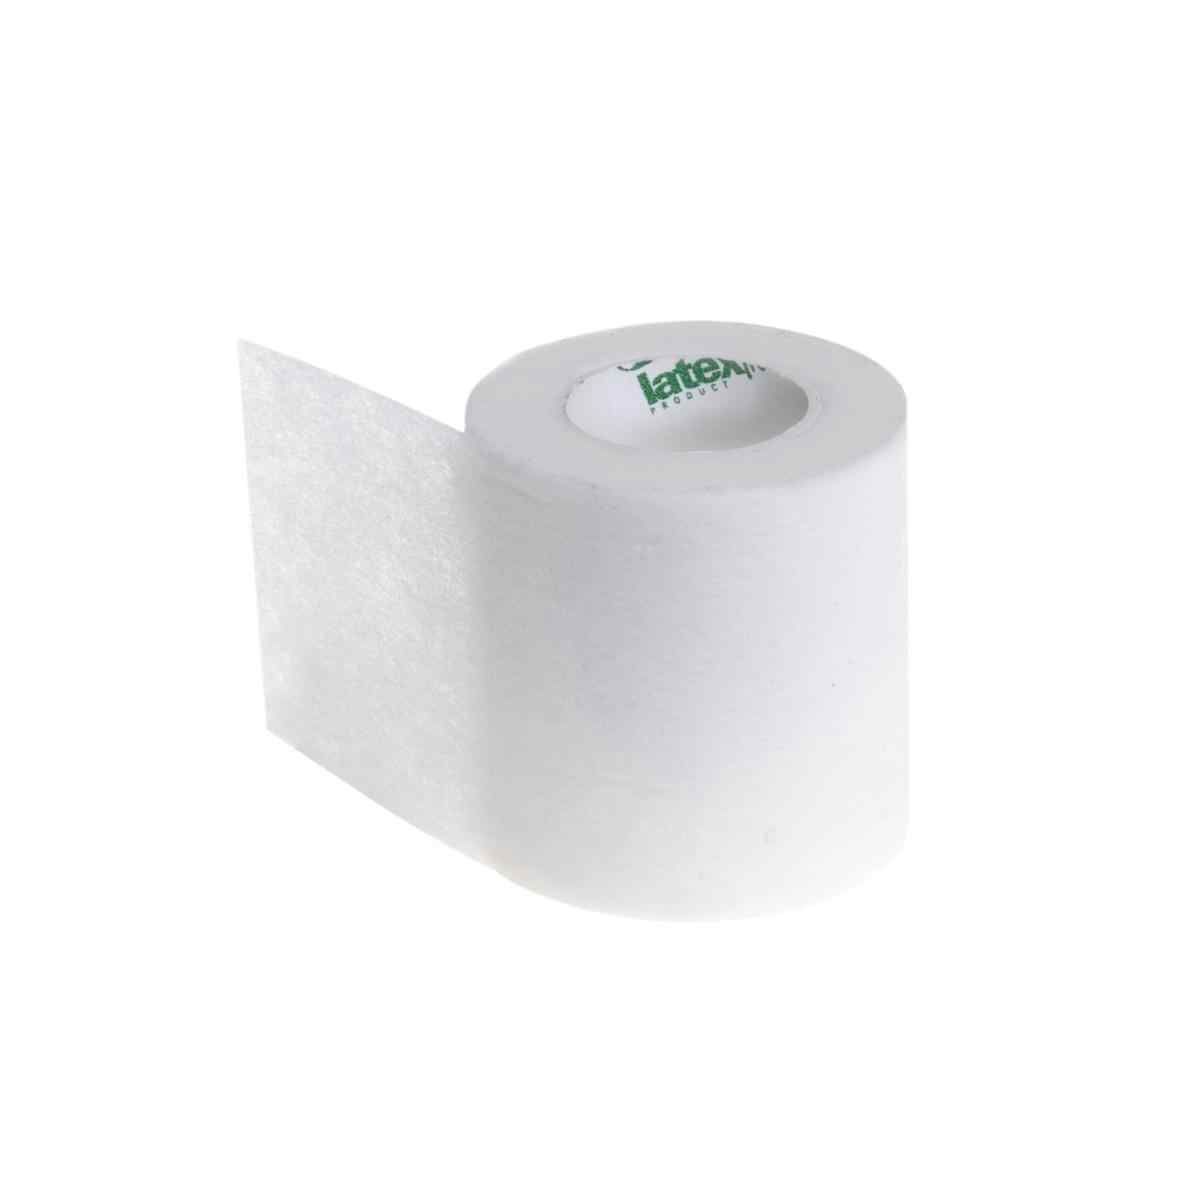 CURAD Paper Adhesive Tape with Dispenser, NON260002D, 2" X 10 yd - Case of 72